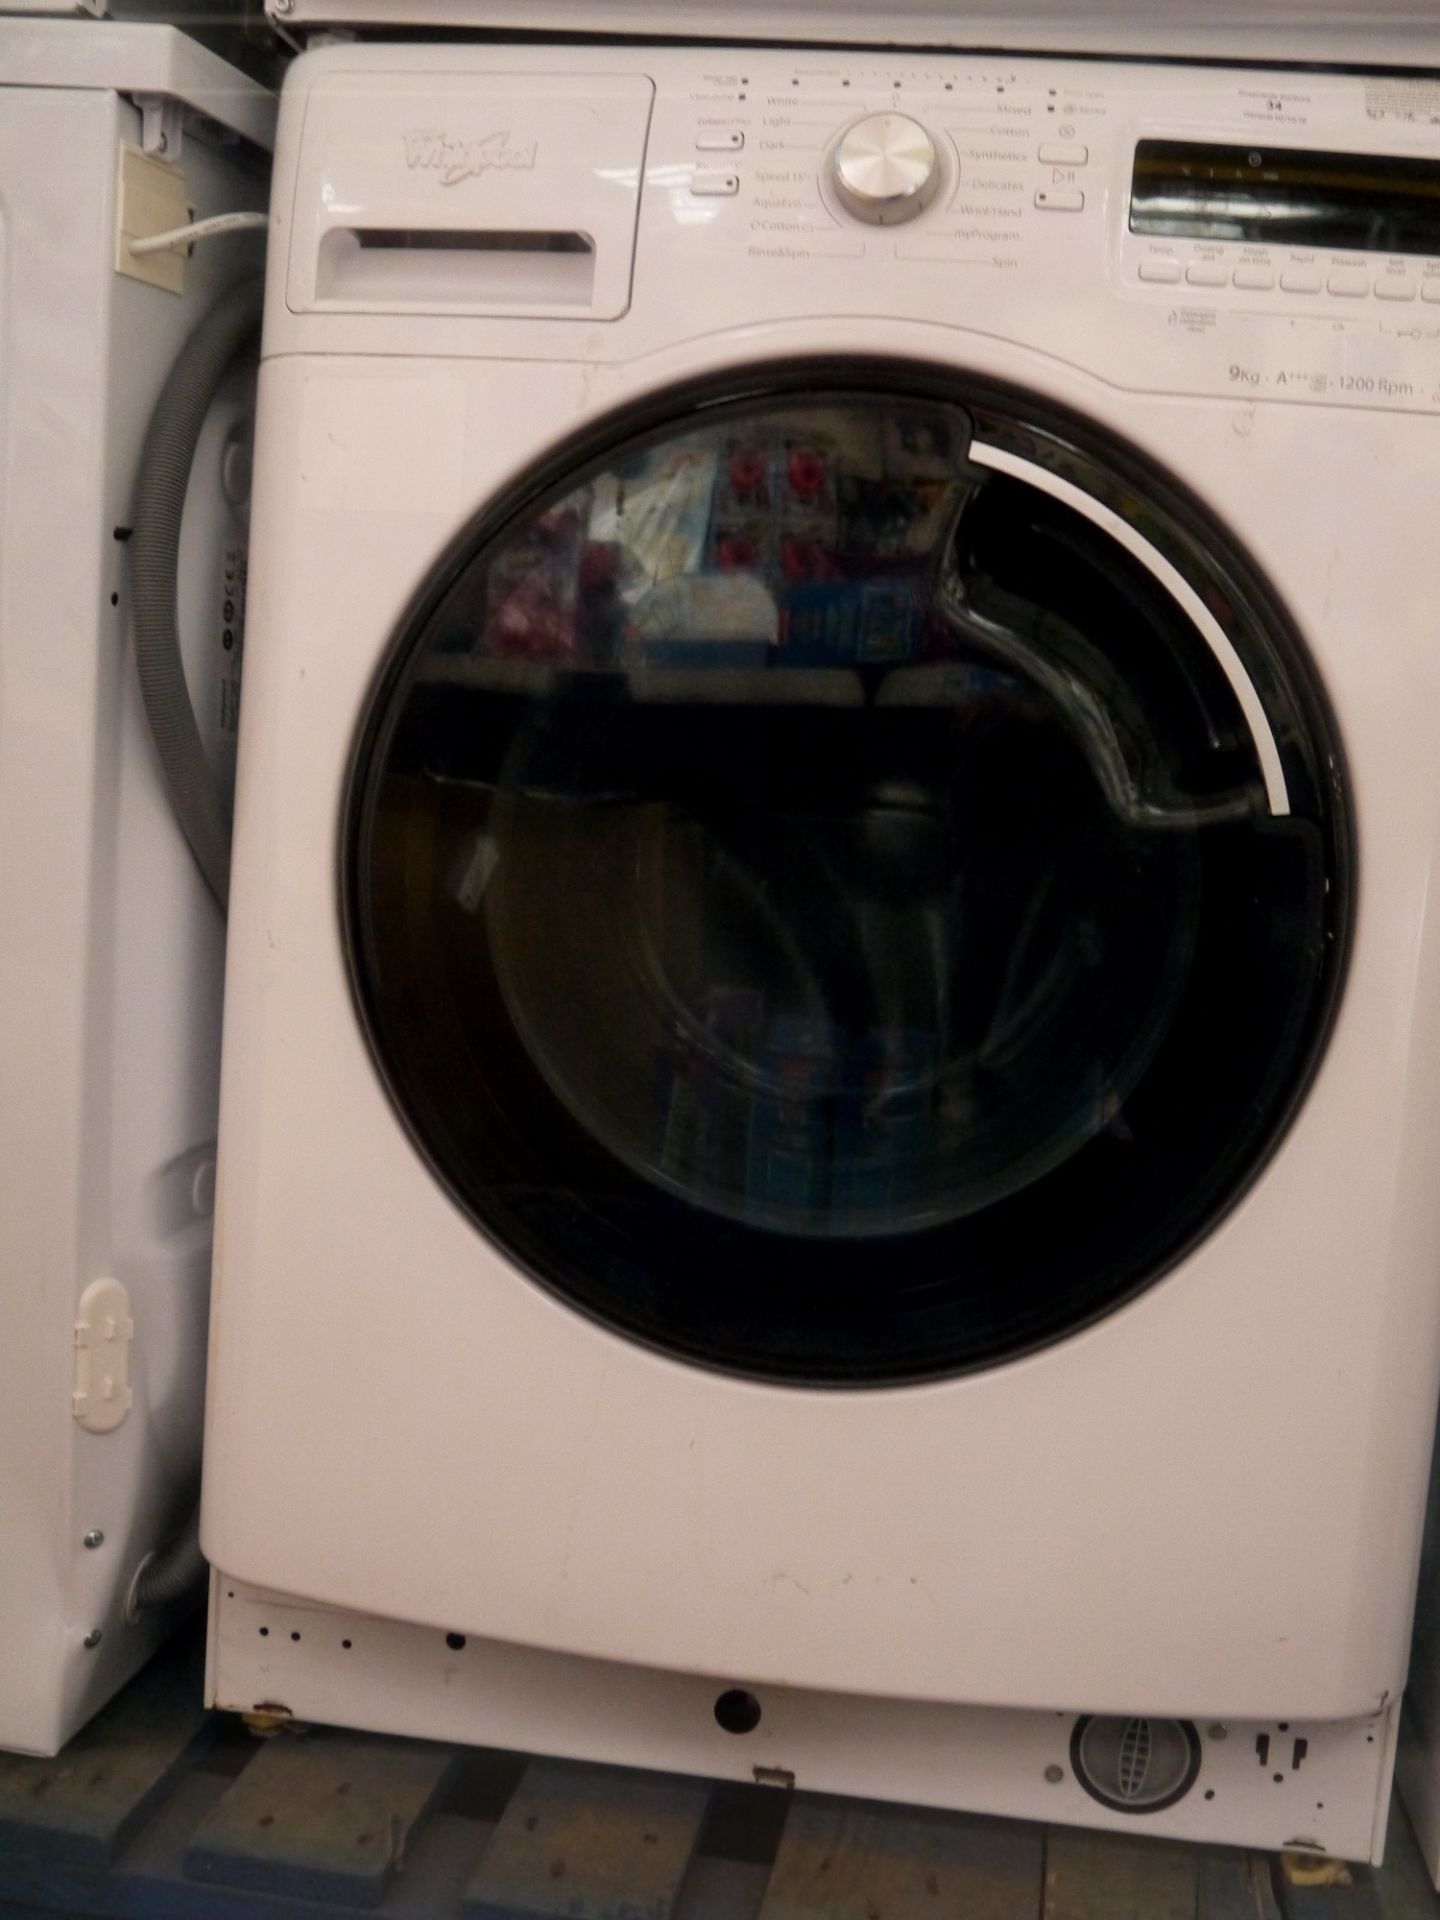 Whirlpool 9kg washing machine, powers on and spins.